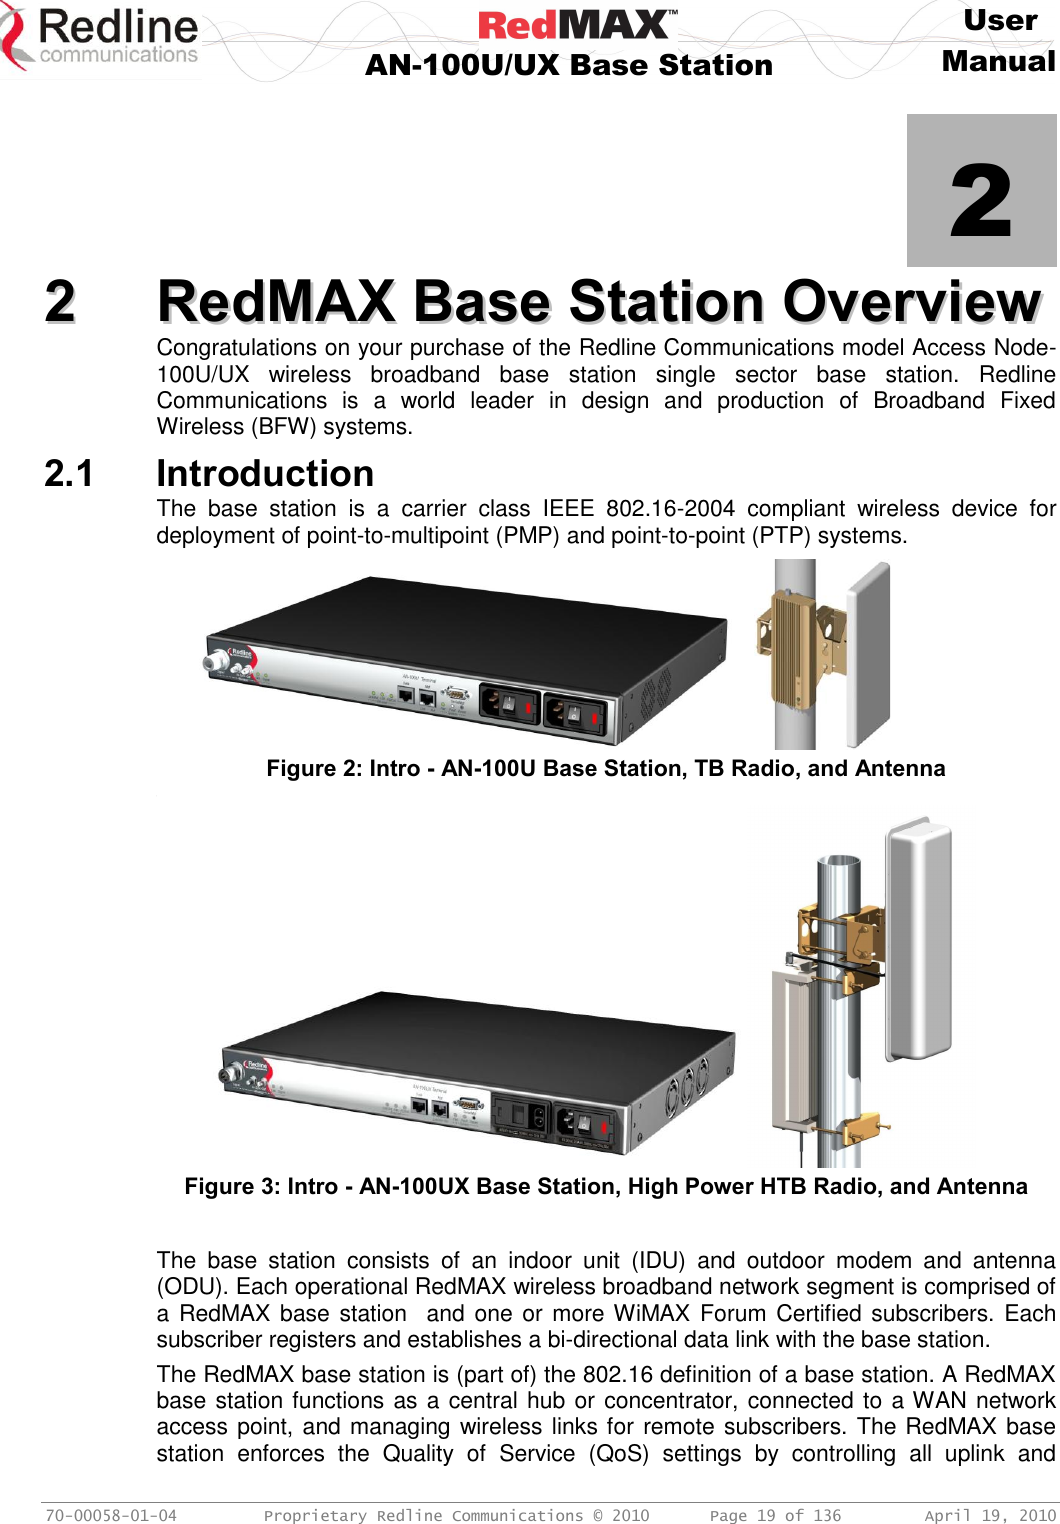     User  AN-100U/UX Base Station Manual   70-00058-01-04  Proprietary Redline Communications © 2010   Page 19 of 136  April 19, 2010            2 22  RReeddMMAAXX  BBaassee  SSttaattiioonn  OOvveerrvviieeww  Congratulations on your purchase of the Redline Communications model Access Node-100U/UX  wireless  broadband  base  station  single  sector  base  station.  Redline Communications  is  a  world  leader  in  design  and  production  of  Broadband  Fixed Wireless (BFW) systems. 2.1 Introduction The  base  station  is  a  carrier  class  IEEE  802.16-2004  compliant  wireless  device  for deployment of point-to-multipoint (PMP) and point-to-point (PTP) systems.      Figure 2: Intro - AN-100U Base Station, TB Radio, and Antenna ,  Figure 3: Intro - AN-100UX Base Station, High Power HTB Radio, and Antenna  The  base  station  consists  of  an  indoor  unit  (IDU)  and  outdoor  modem  and  antenna (ODU). Each operational RedMAX wireless broadband network segment is comprised of a RedMAX base station  and  one or more WiMAX  Forum Certified subscribers. Each subscriber registers and establishes a bi-directional data link with the base station. The RedMAX base station is (part of) the 802.16 definition of a base station. A RedMAX base station functions as a central hub or concentrator, connected to a WAN network access point, and managing wireless links for remote subscribers. The RedMAX base station  enforces  the  Quality  of  Service  (QoS)  settings  by  controlling  all  uplink  and 